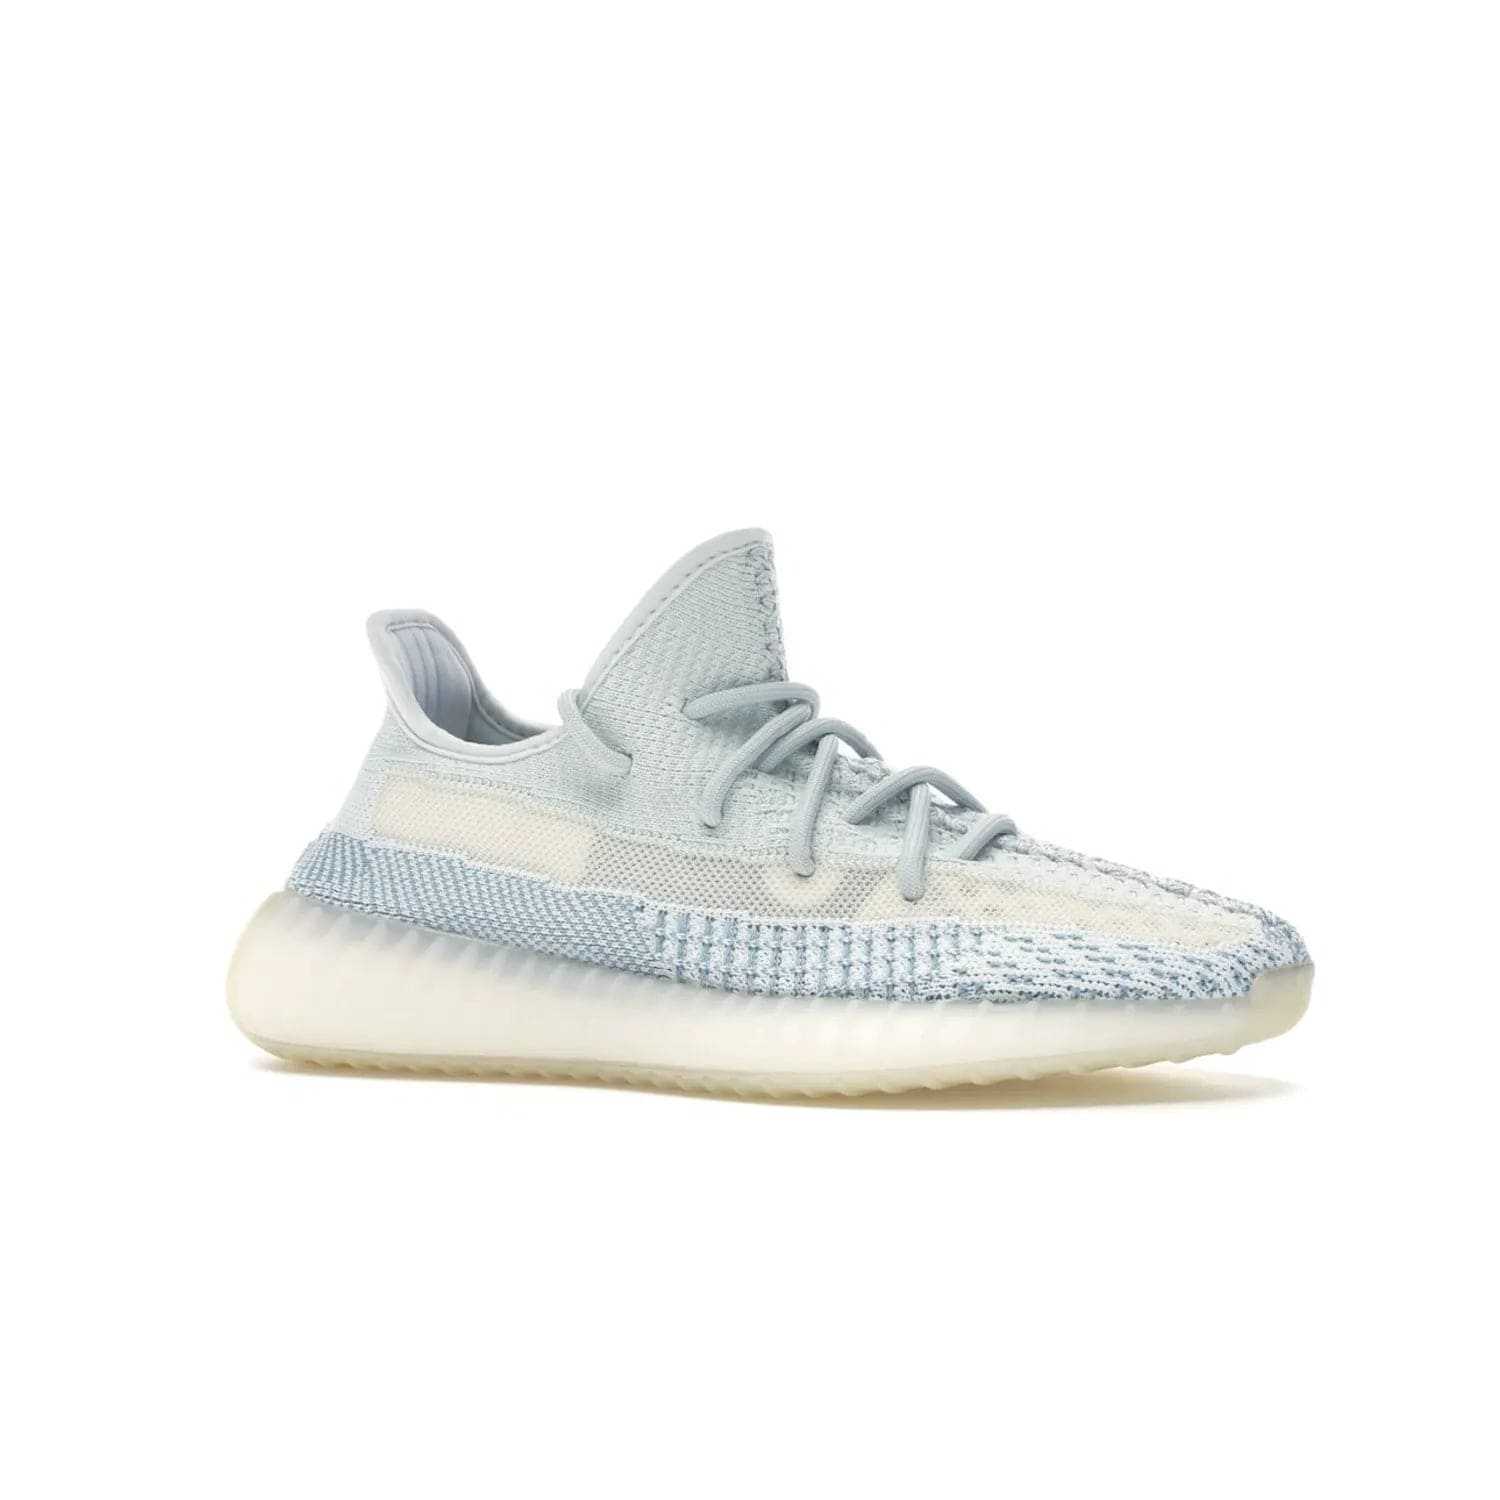 adidas Yeezy Boost 350 V2 Cloud White (Non-Reflective) - Image 3 - Only at www.BallersClubKickz.com - Adidas Yeezy Boost 350 V2 Cloud White (Non-Reflective) features Primeknit fabric and a unique, eye-catching design of cream, bluish-white, and transparent strip. Step out in timeless style with this eye-catching sneaker.